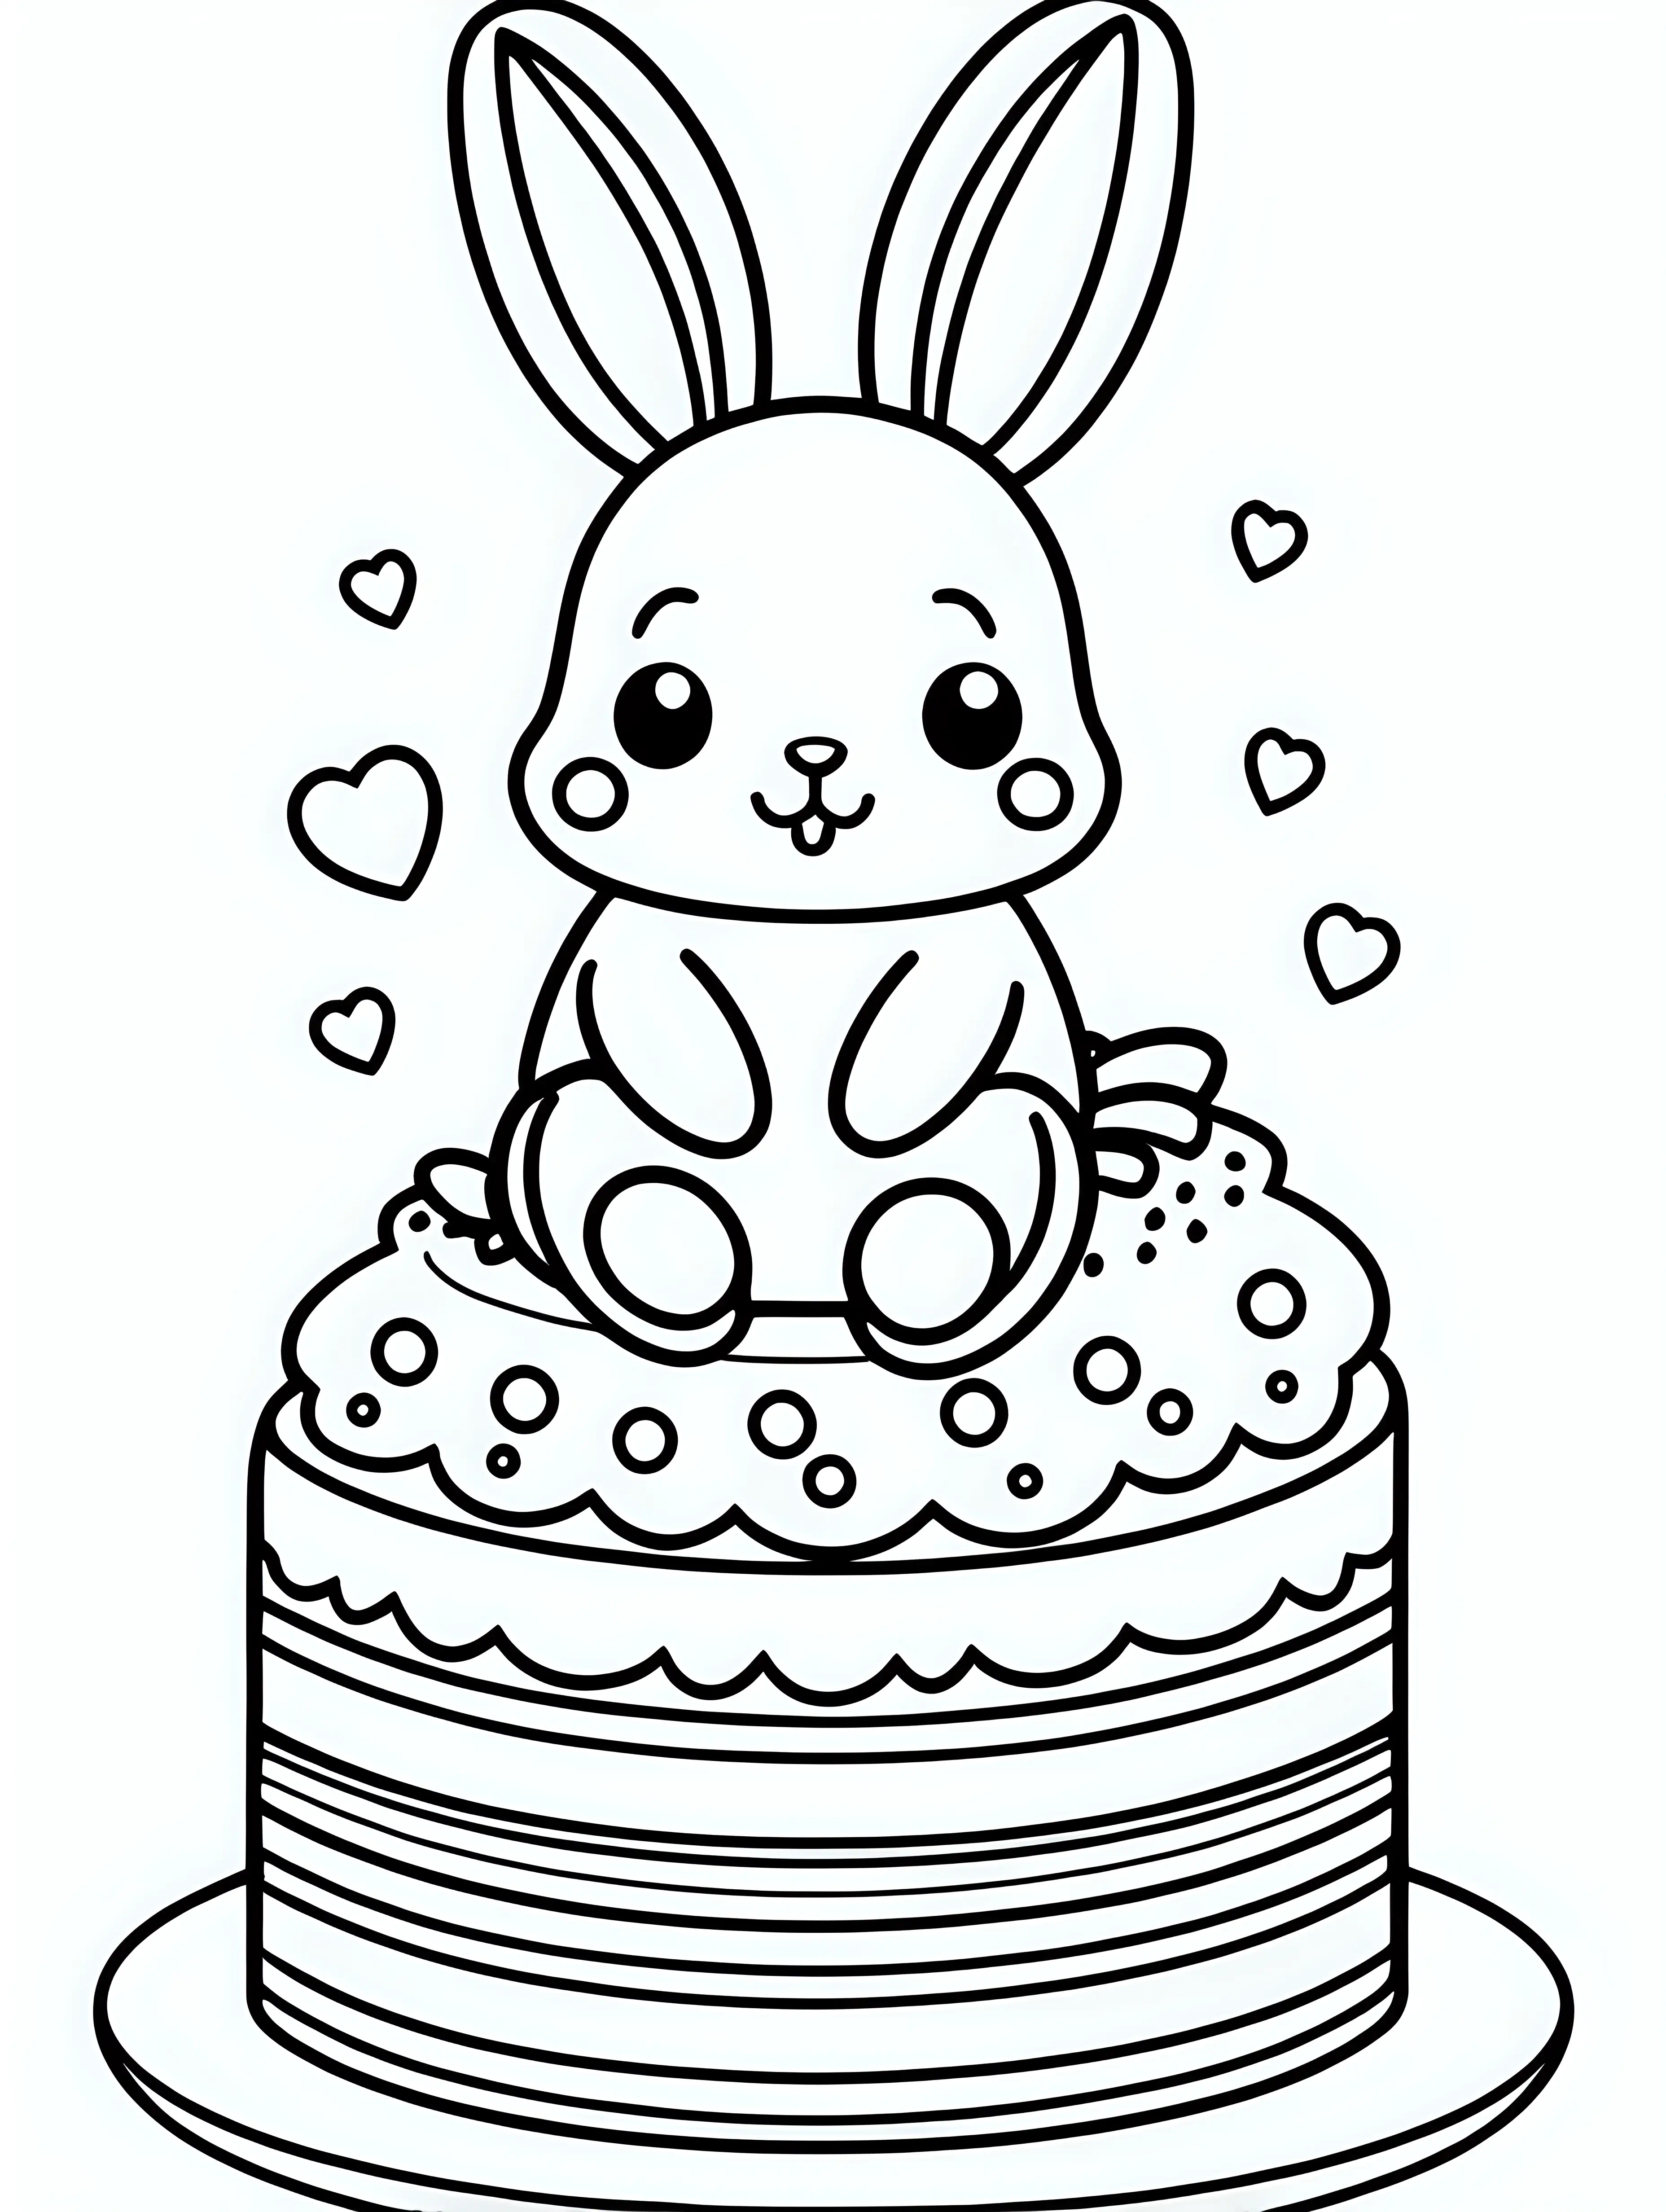 How To Draw Birthday Cake: 30 Simple And Basic Drawing Pages Of Sweet Cakes  On Birthday To Learn To Draw | Great Gift For Kids And Children To Relax:  Cannon, Kara: 9798856935508: